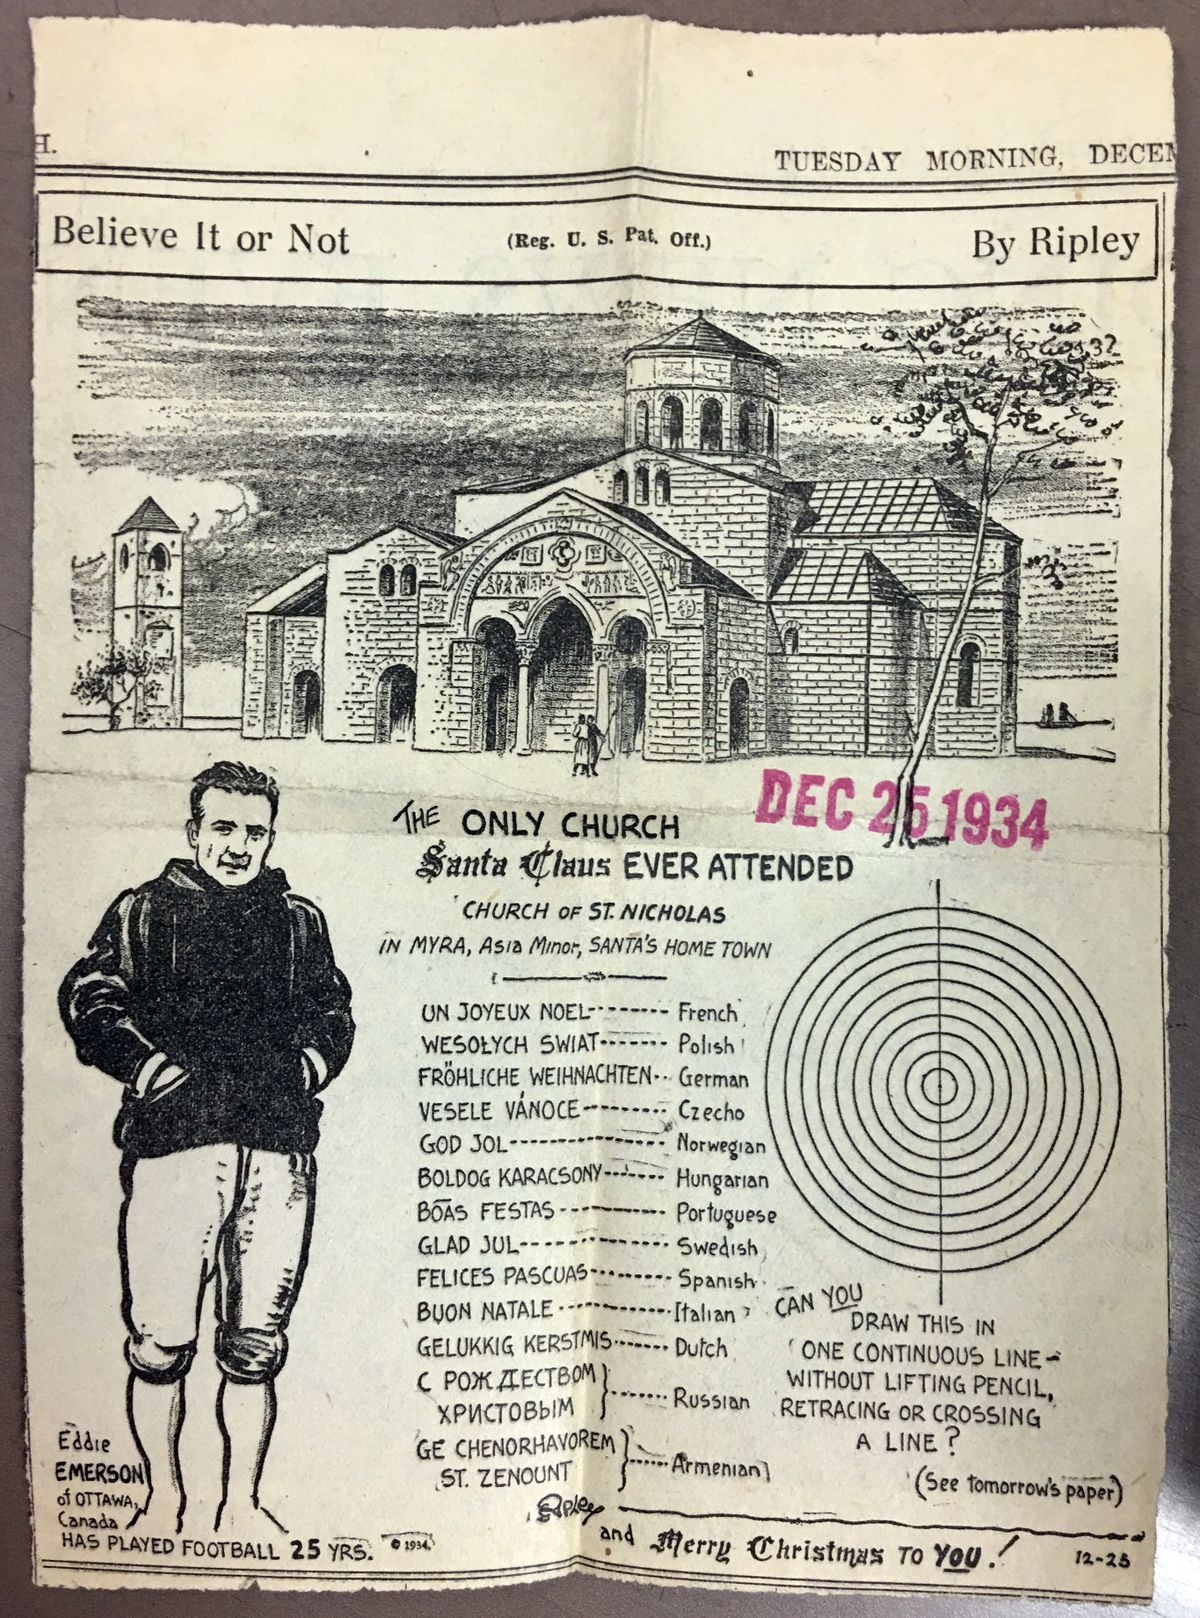 Newspapers often carried Christmas-themed features. 